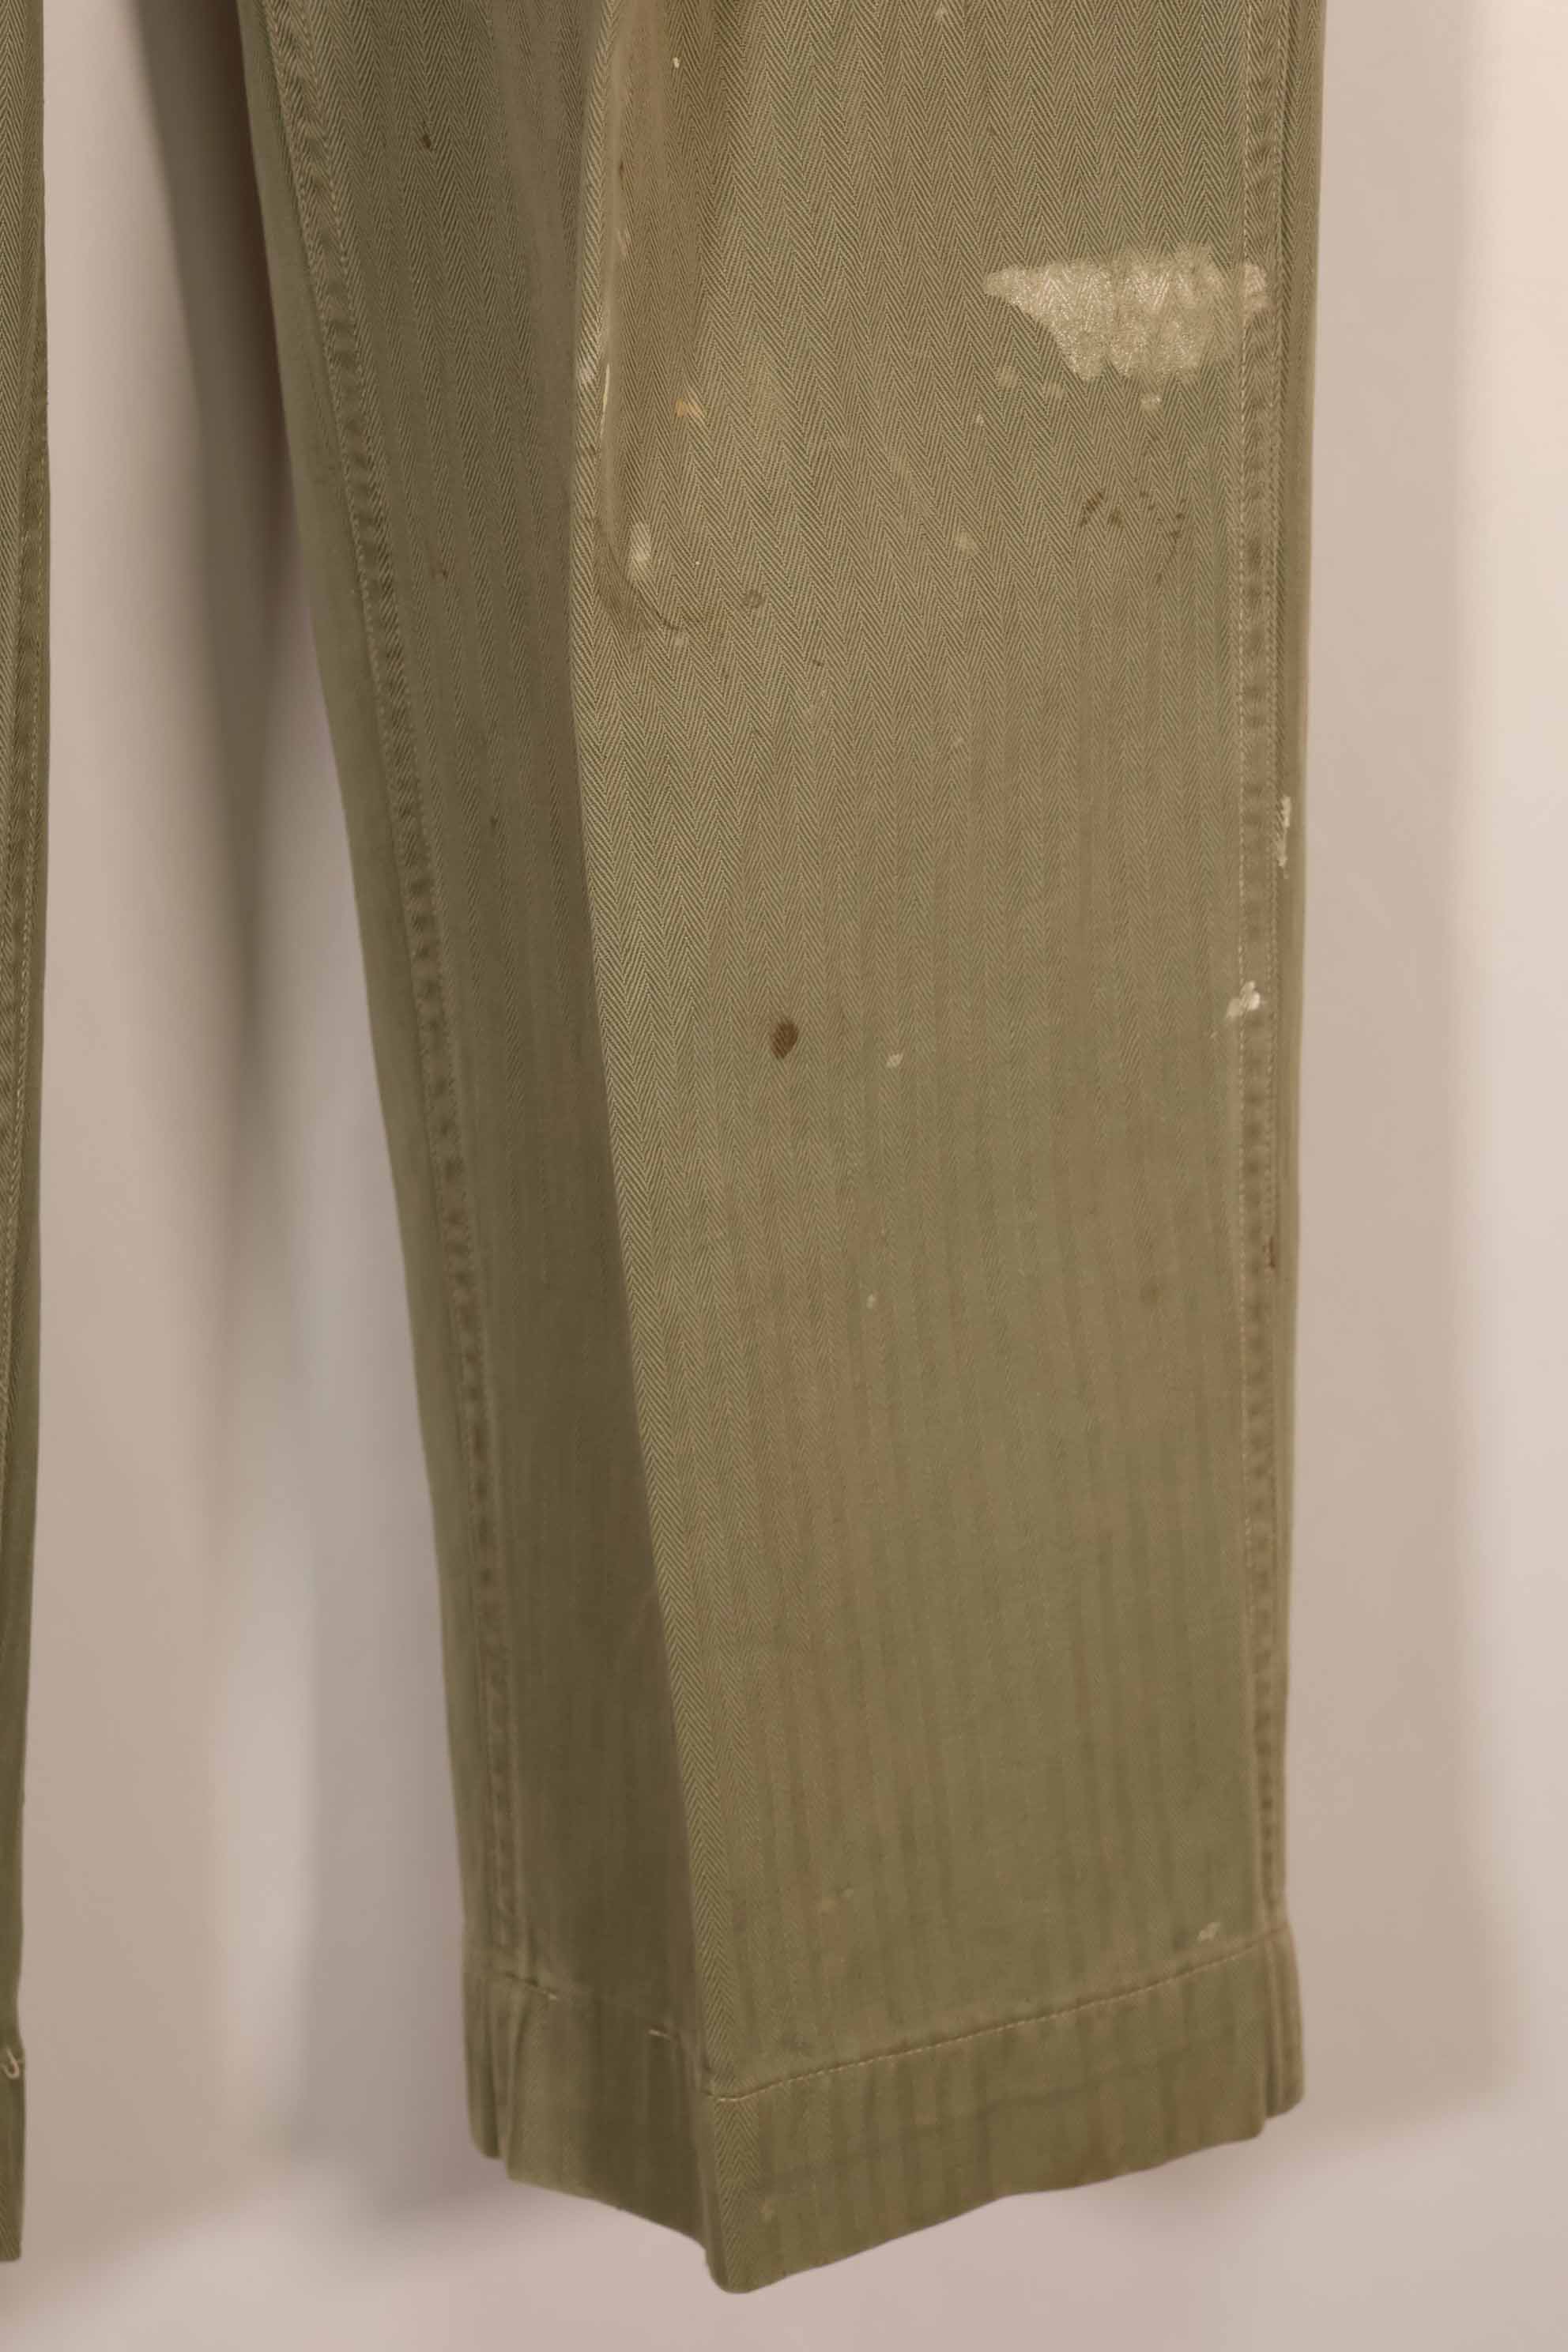 Real 1940s U.S. Marine Corps USMC M42 HBT utility pants, faded, stained.